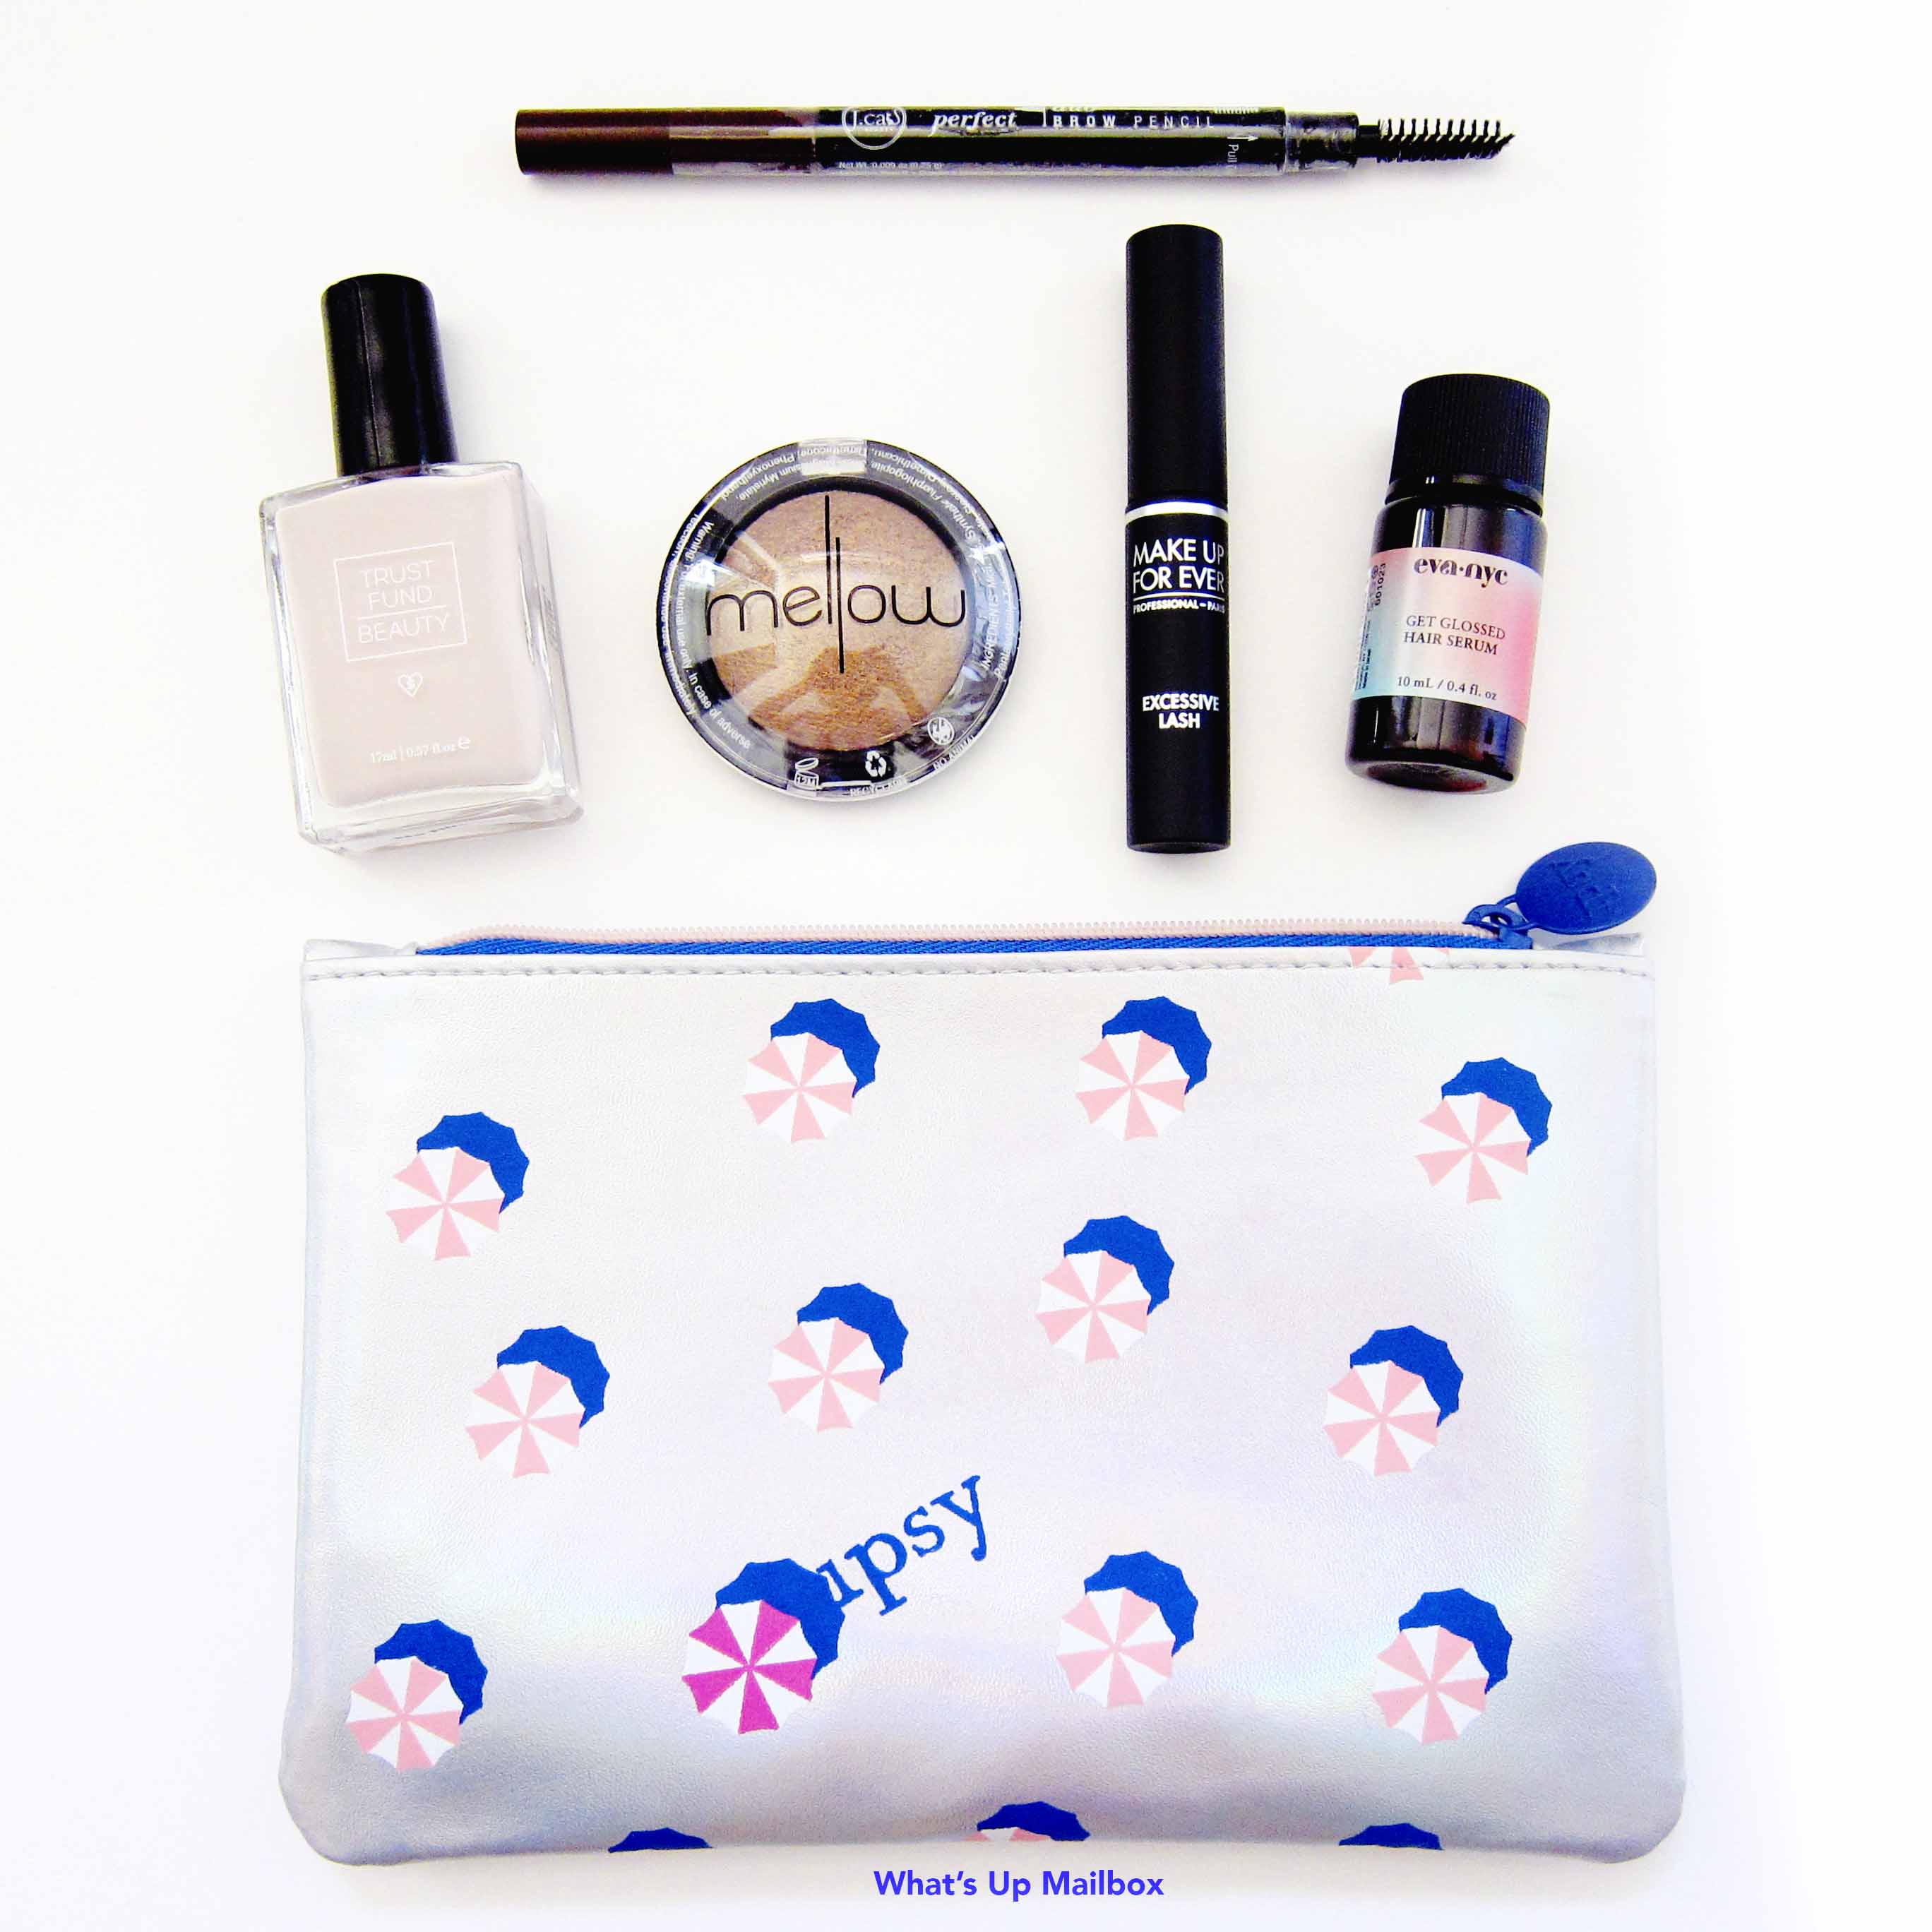 Ipsy July 2016 Glam Bag Review!